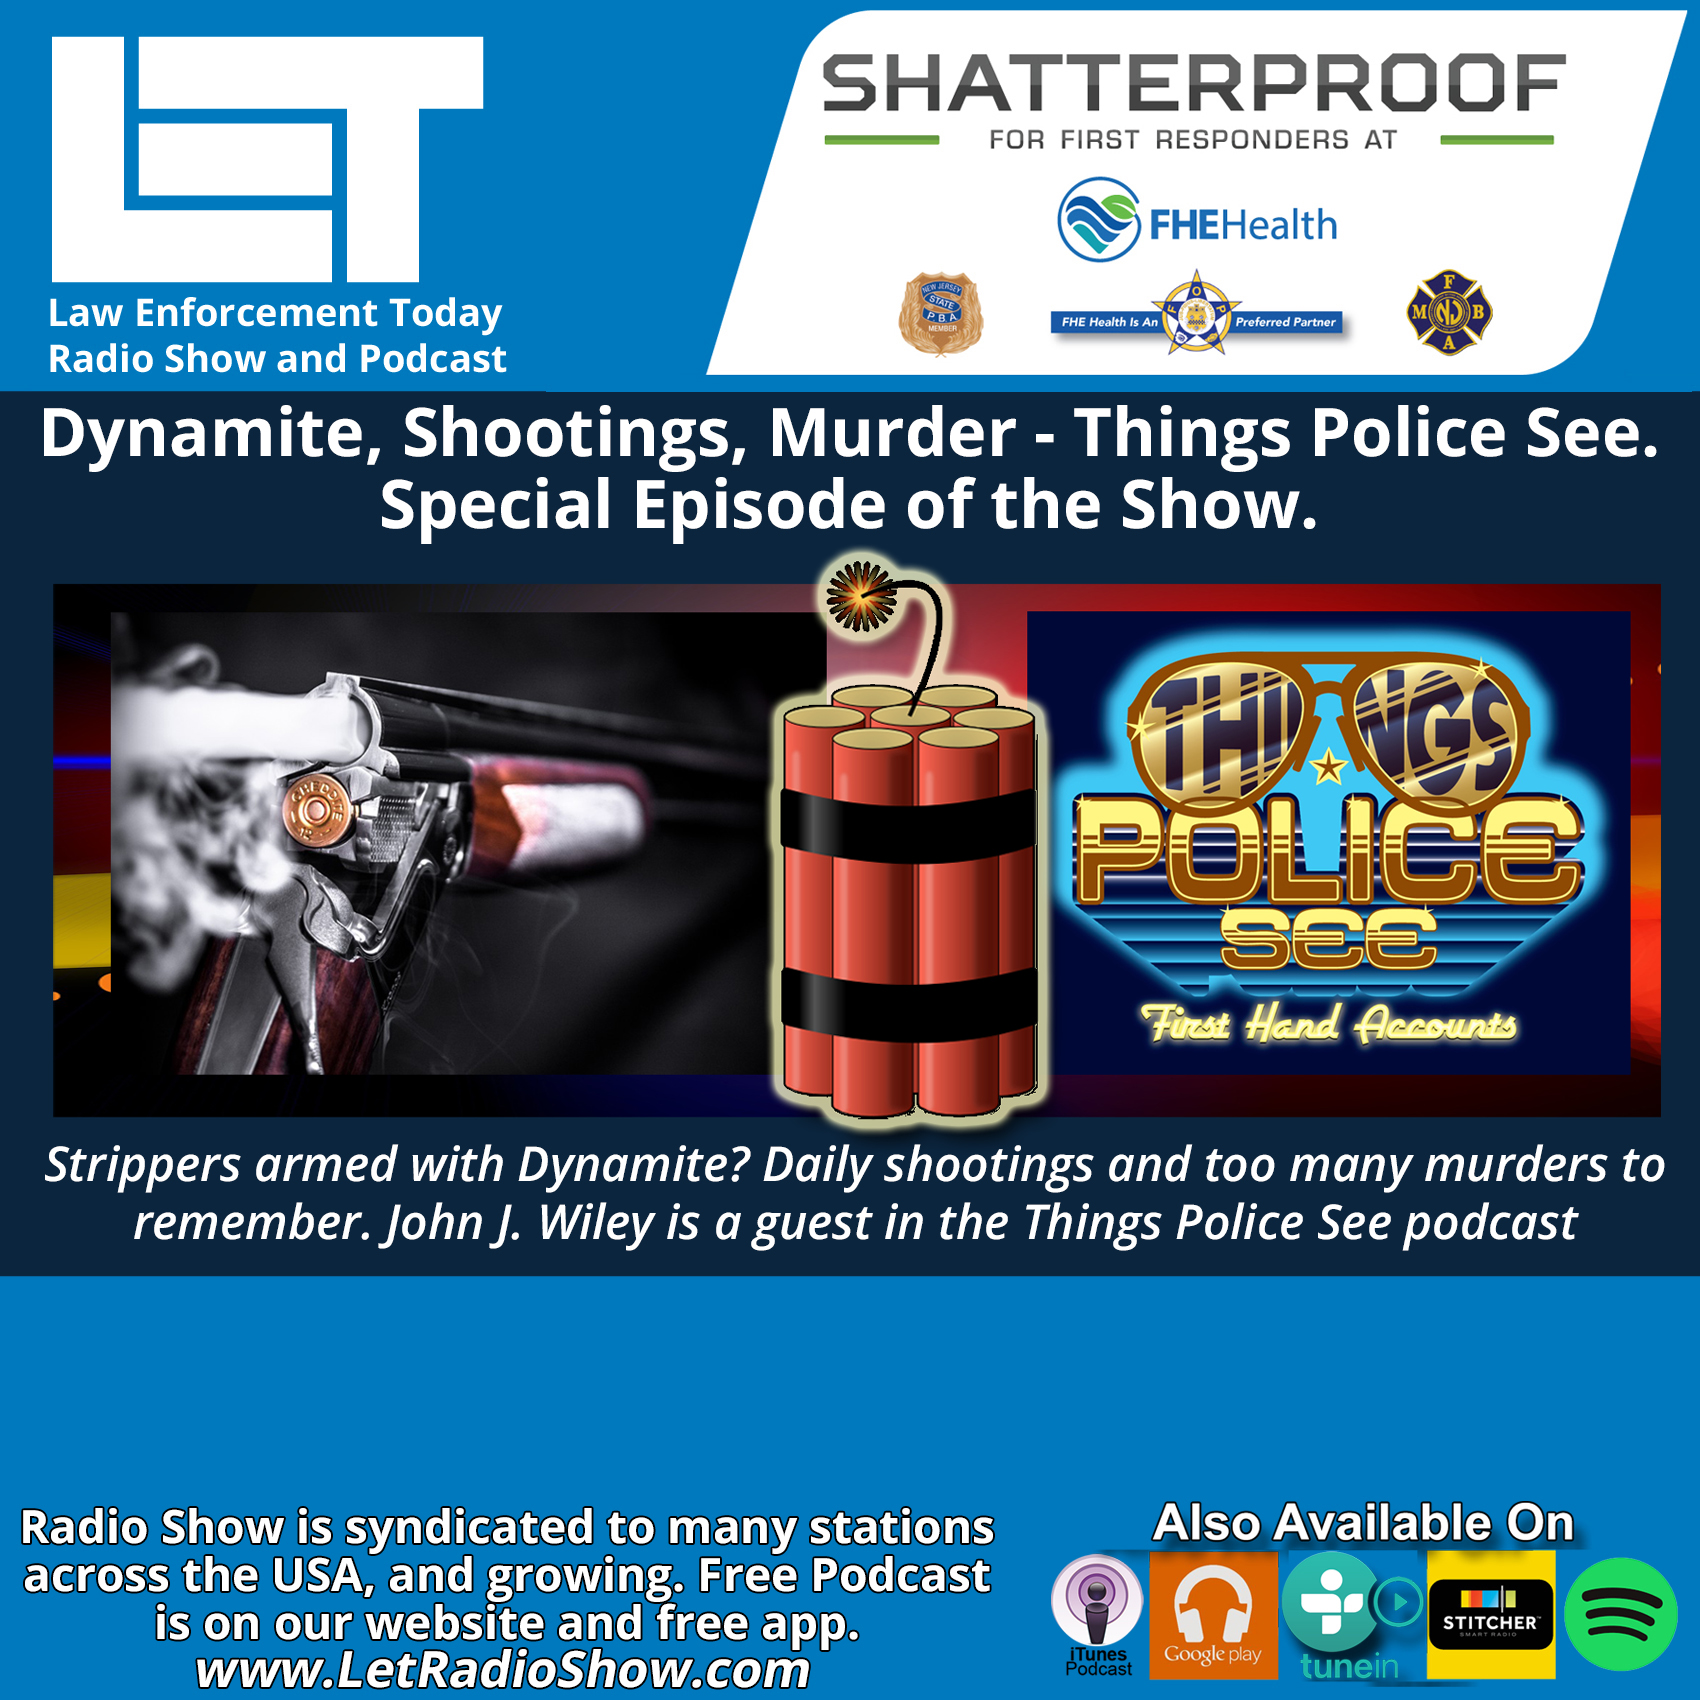 Murder, Dynamite, Shootings in Baltimore. Things Police See.  Special Episode.